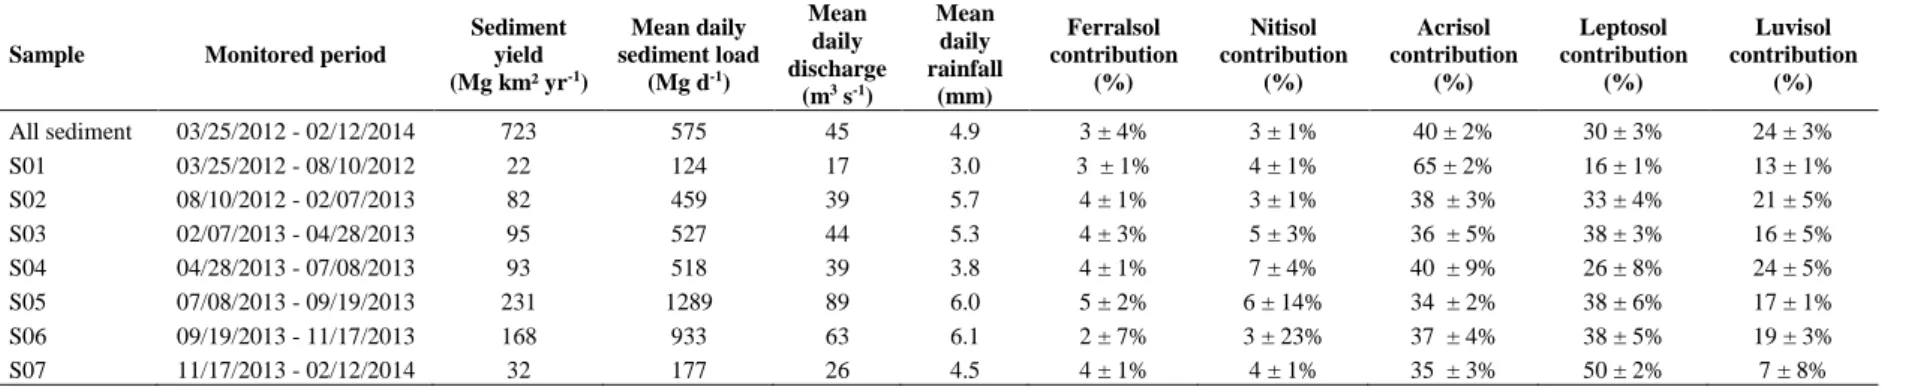 Table 1. Outlet sediment sample characteristics for each monitored period (sediment yield, mean daily sediment load, water discharge and rainfall) and distribution modelling  results for each monitored period and soil type